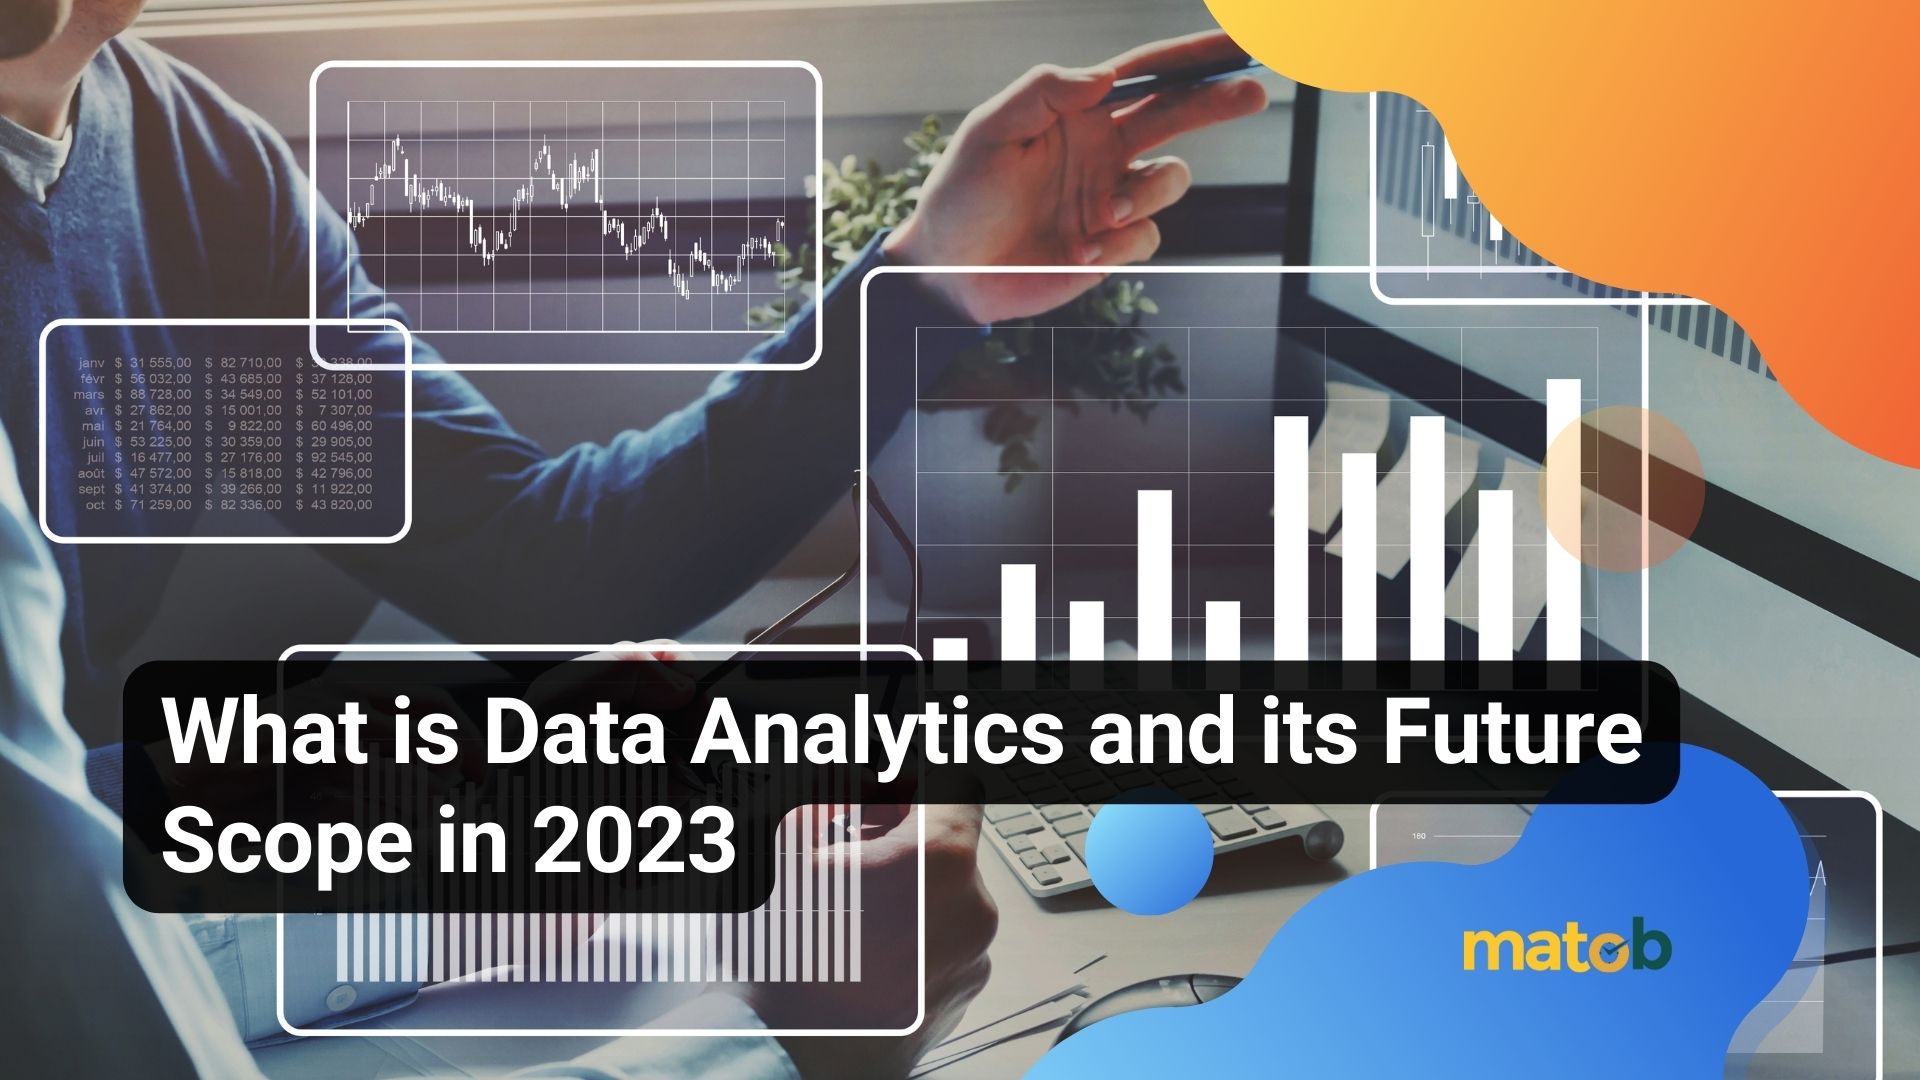 What is Data Analytics and its Future Scope in 2023